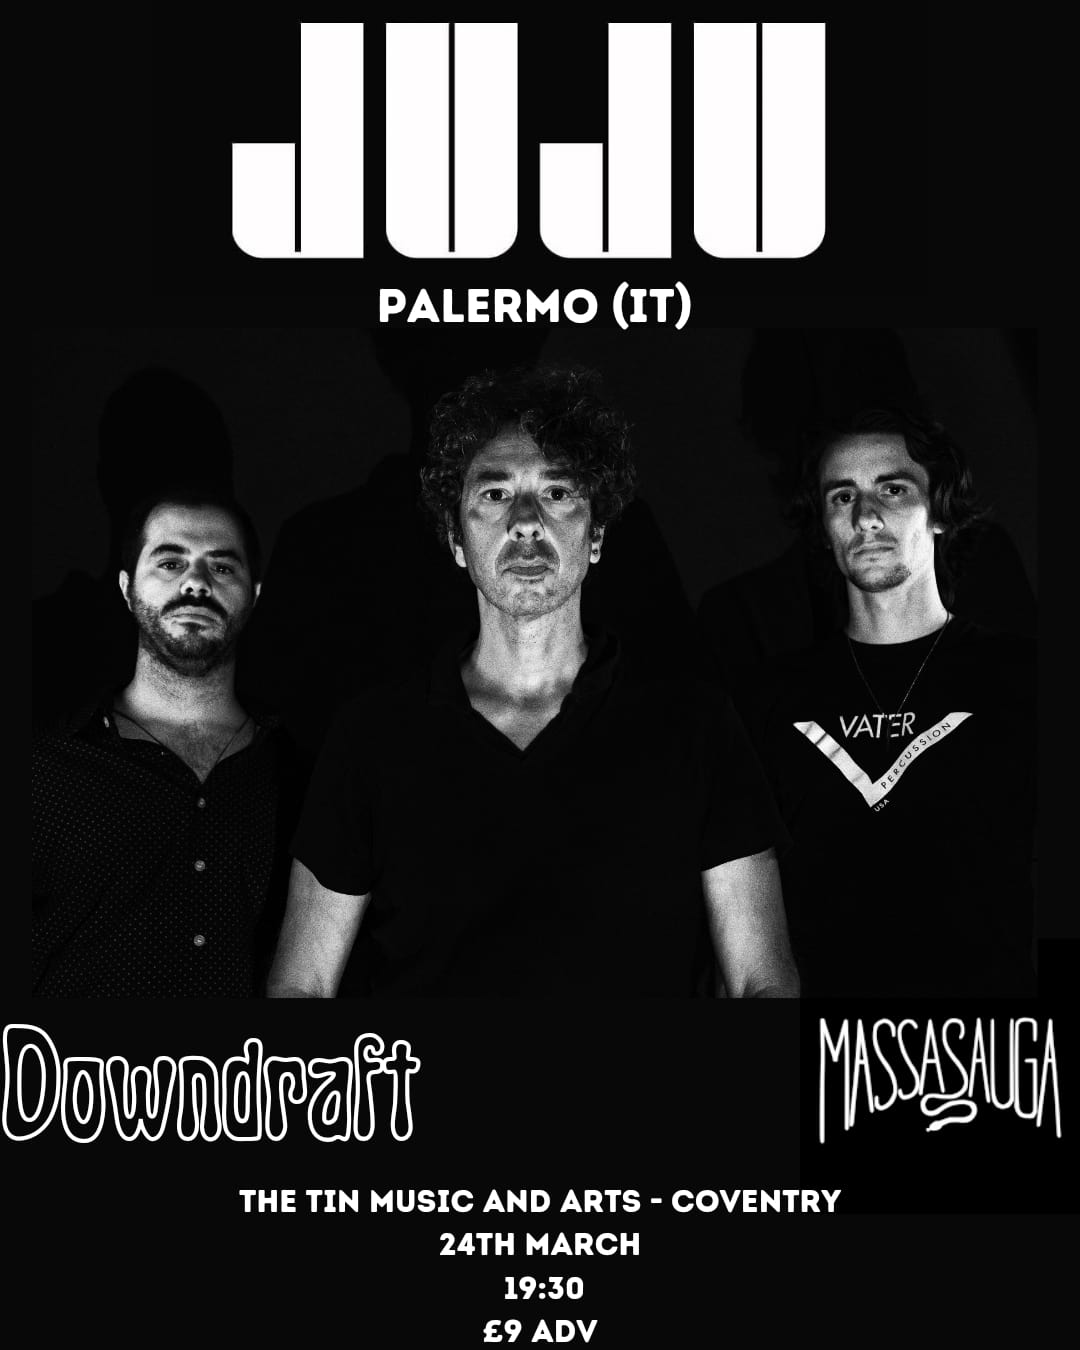 Poster for Juju, a Palermo-based psychedelic rock band who are performing at The Tin Music and Arts on Sunday 24th March 2024. Tickets are £9 in advance. Support comes from Downdraft and Massasauga.